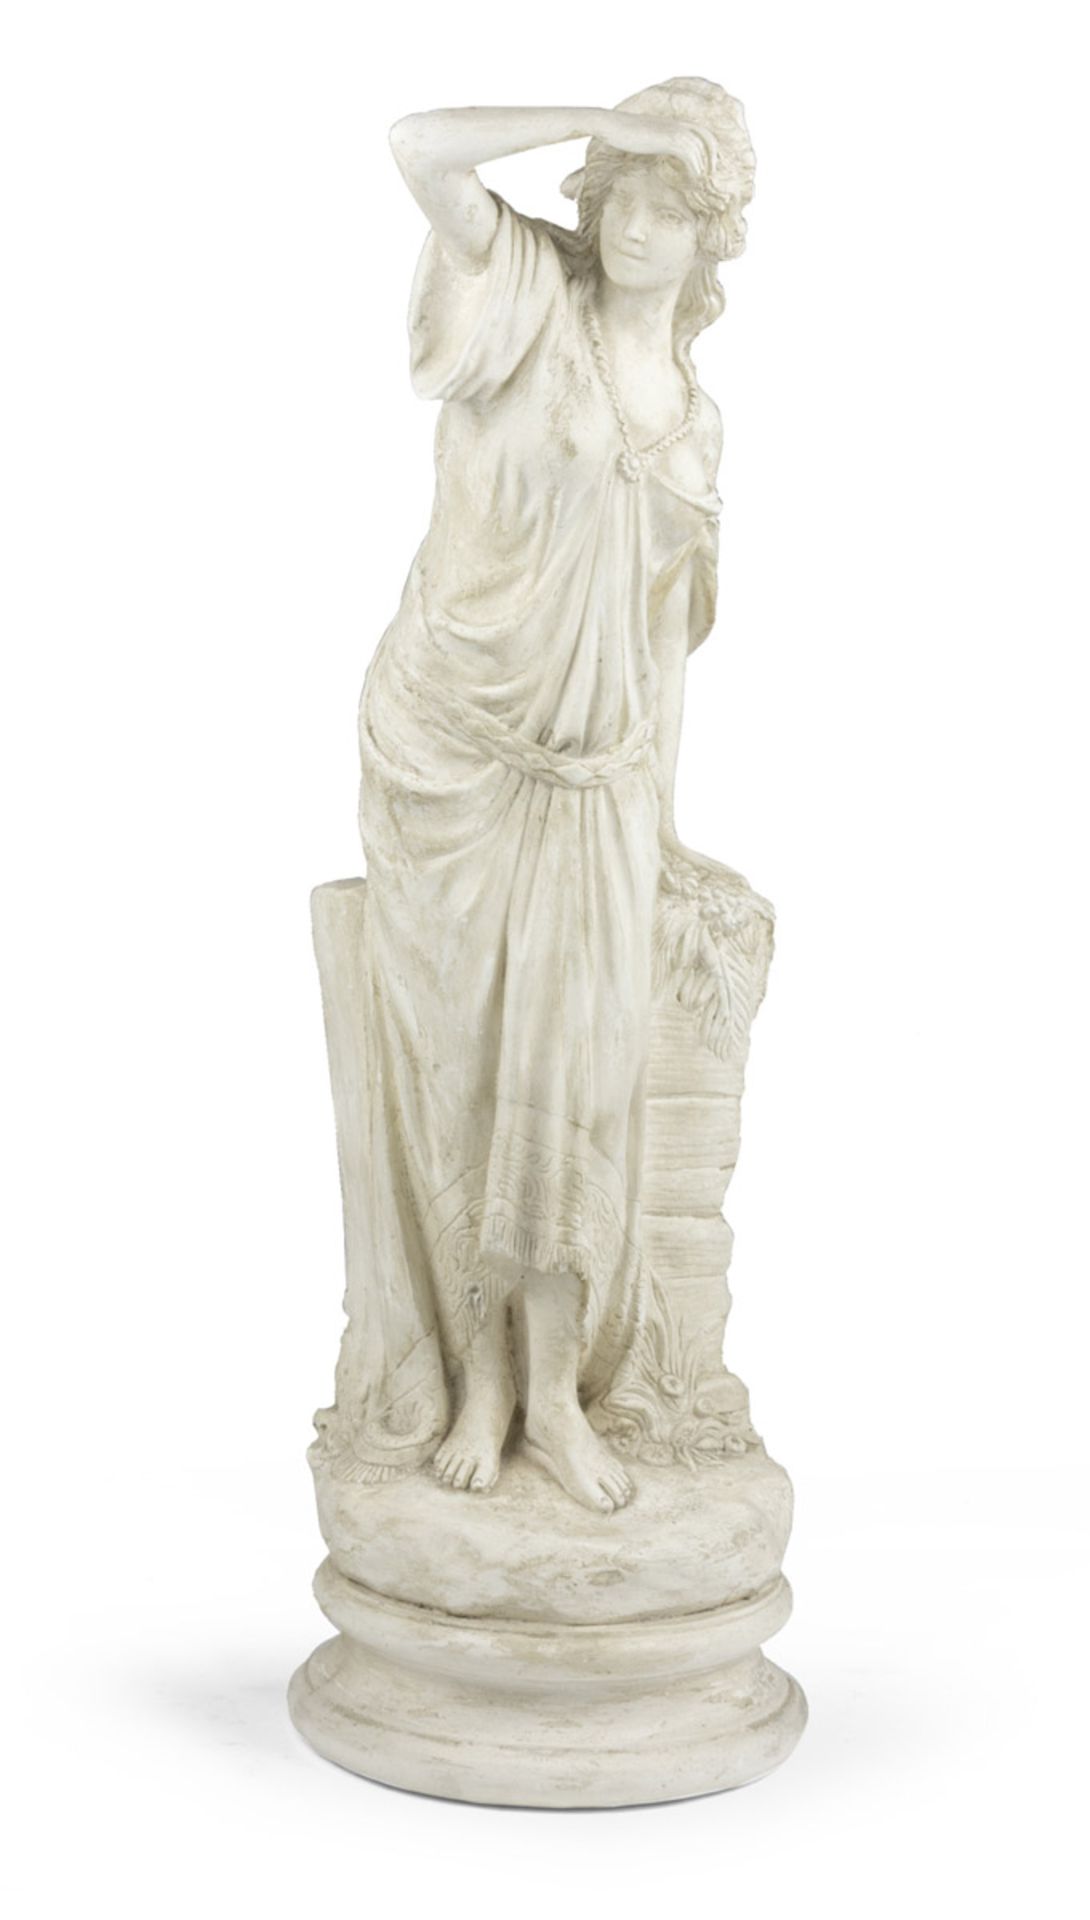 PLASTER SCULPTURE EARLY 20TH CENTURY